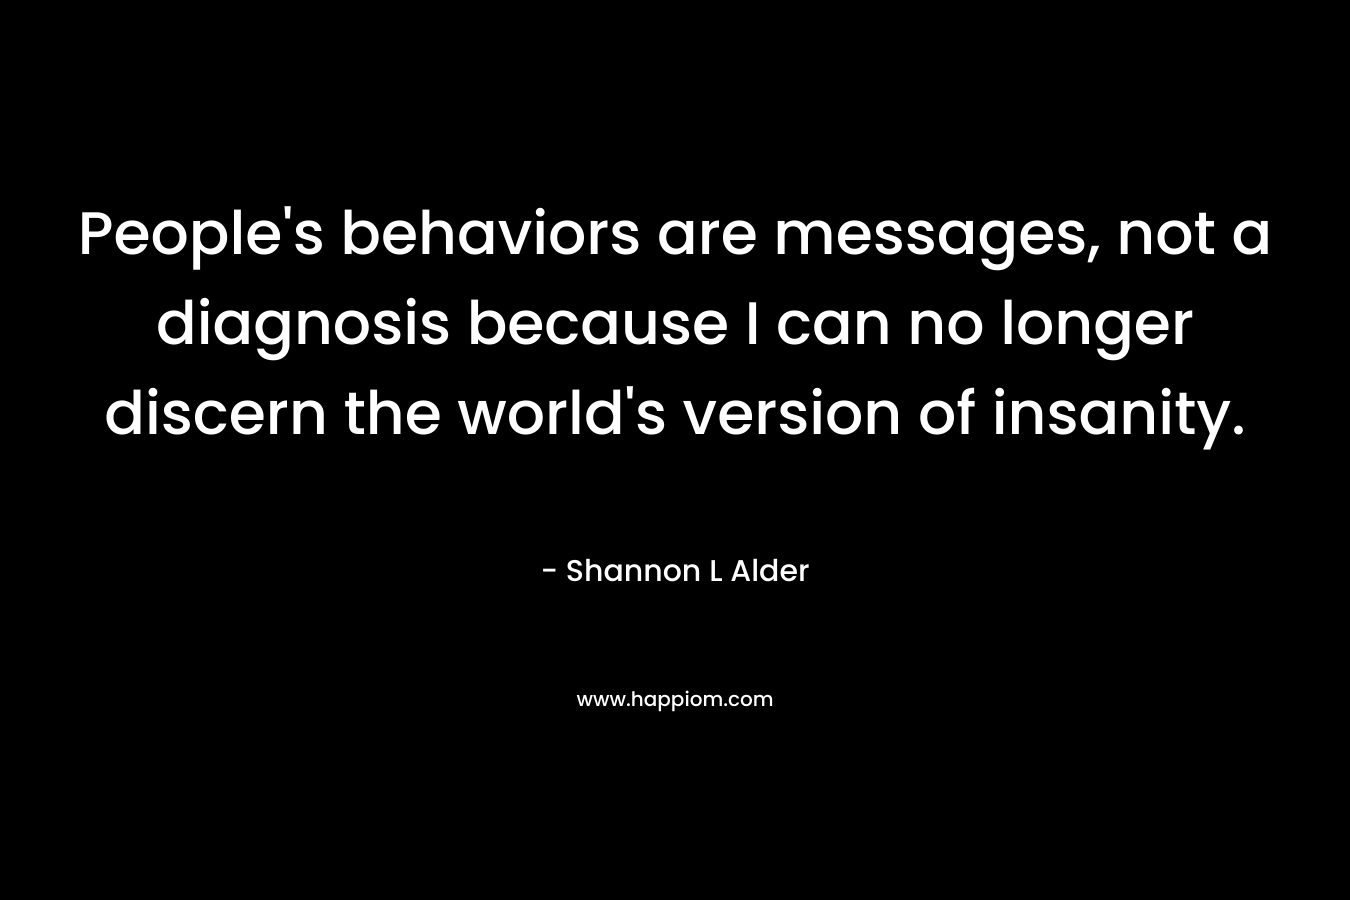 People’s behaviors are messages, not a diagnosis because I can no longer discern the world’s version of insanity. – Shannon L Alder